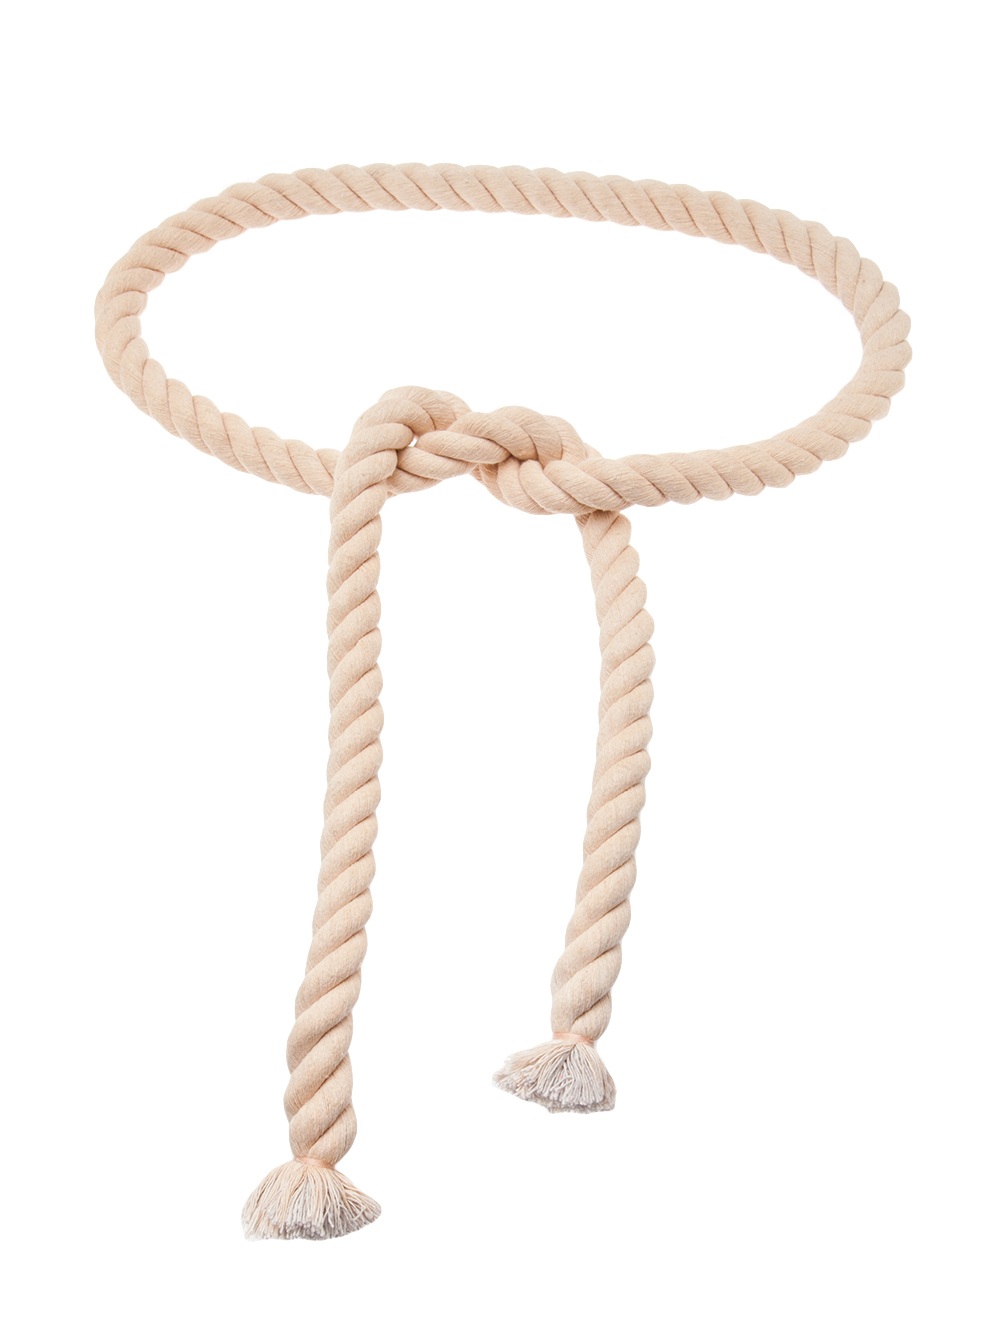 Ryan Roche Rope Belt in Natural